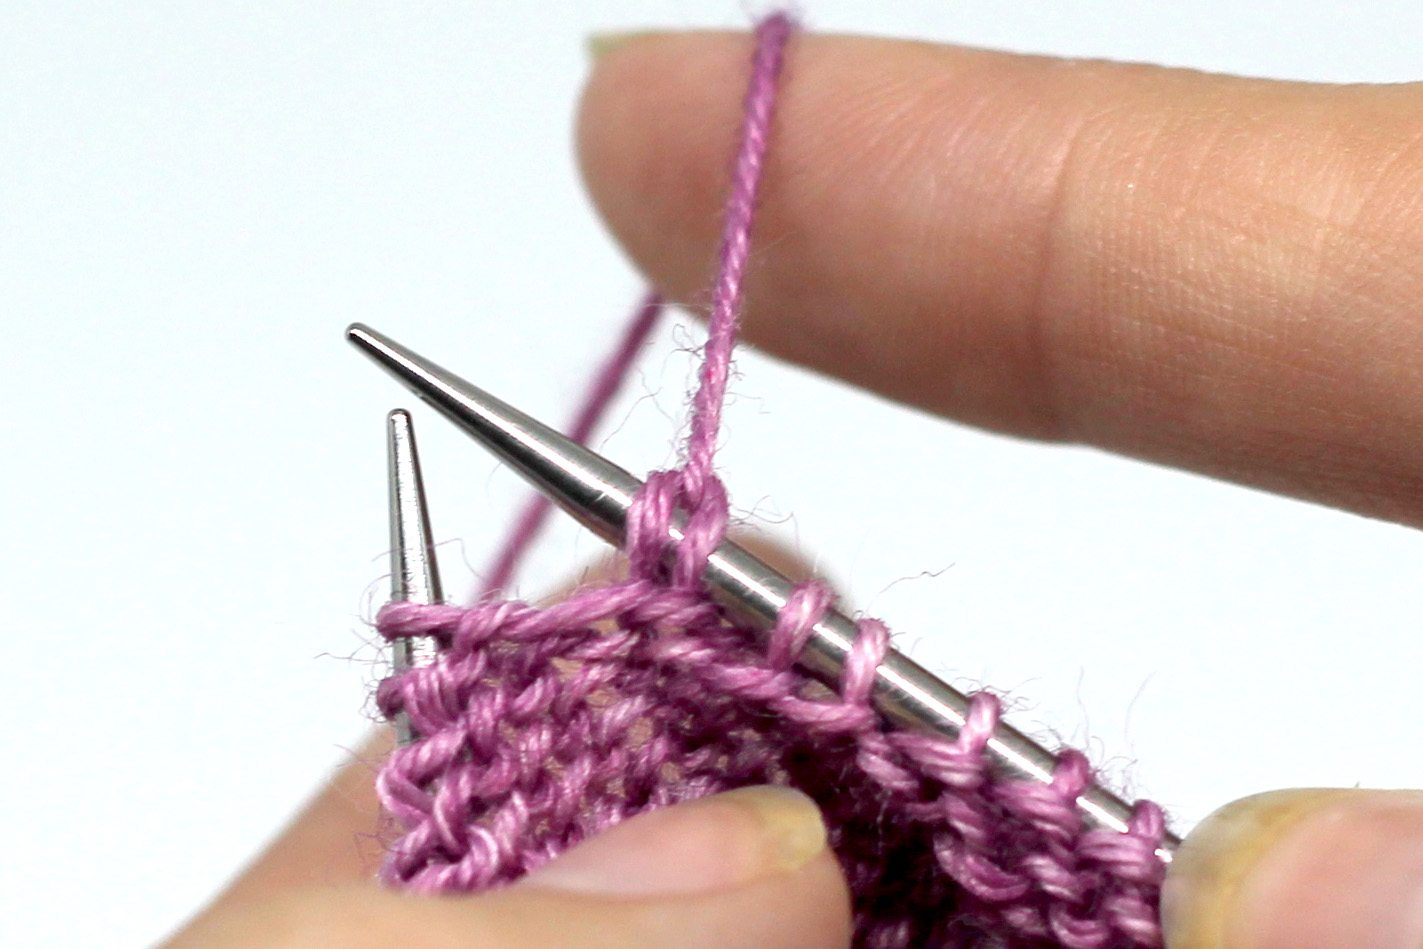 The working yarn has been pulled up over the knitting needle, causing the stitch to change shape and giving two strands over the needle instead of one.